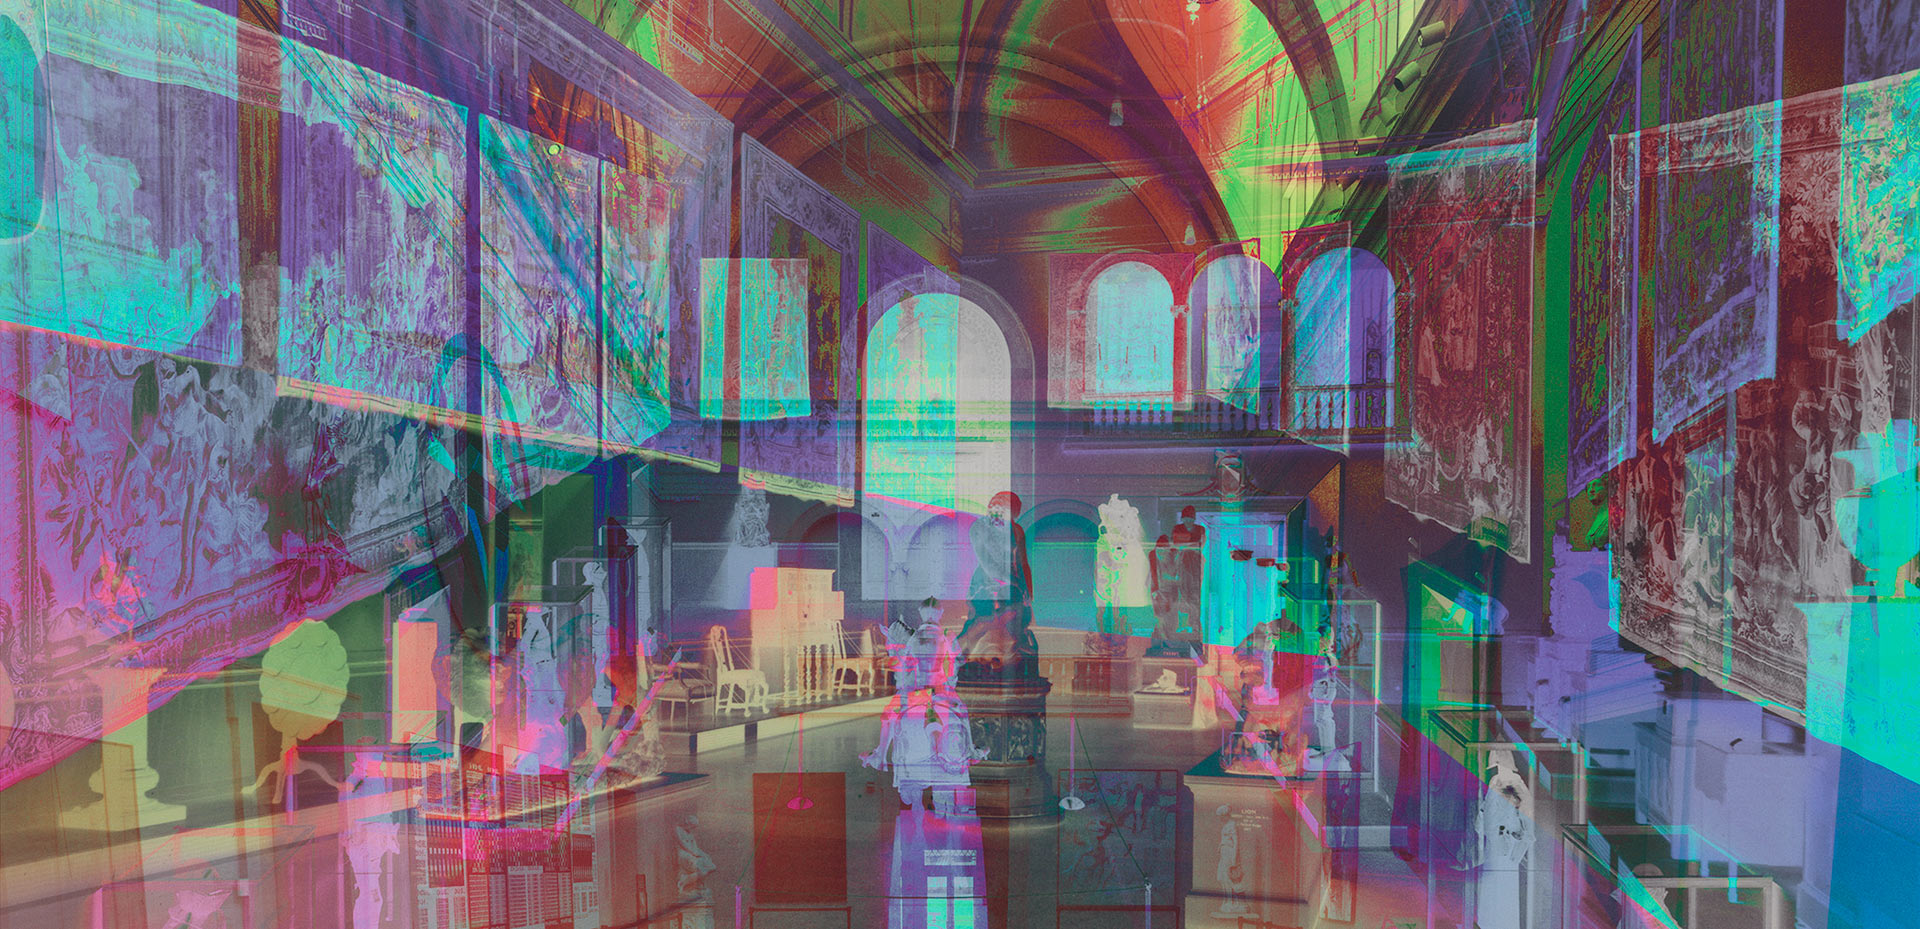 A detail of a photo by James Welling, titled Morgan Great Hall, dated 2015.